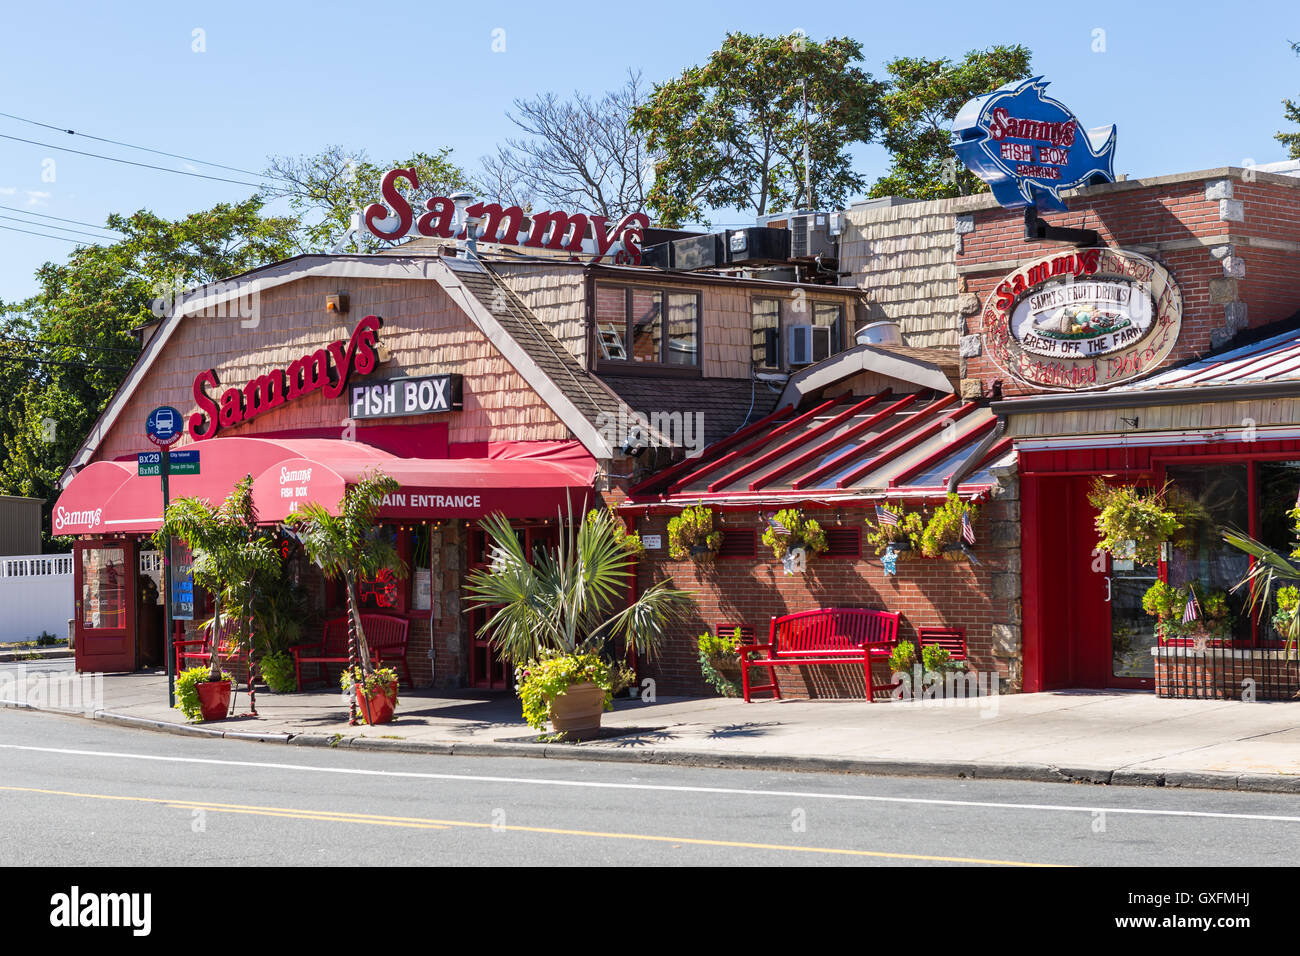 The main entrance to Sammy's Fish Box, a seafood restaurant on City Island in the Bronx, New York City. Stock Photo